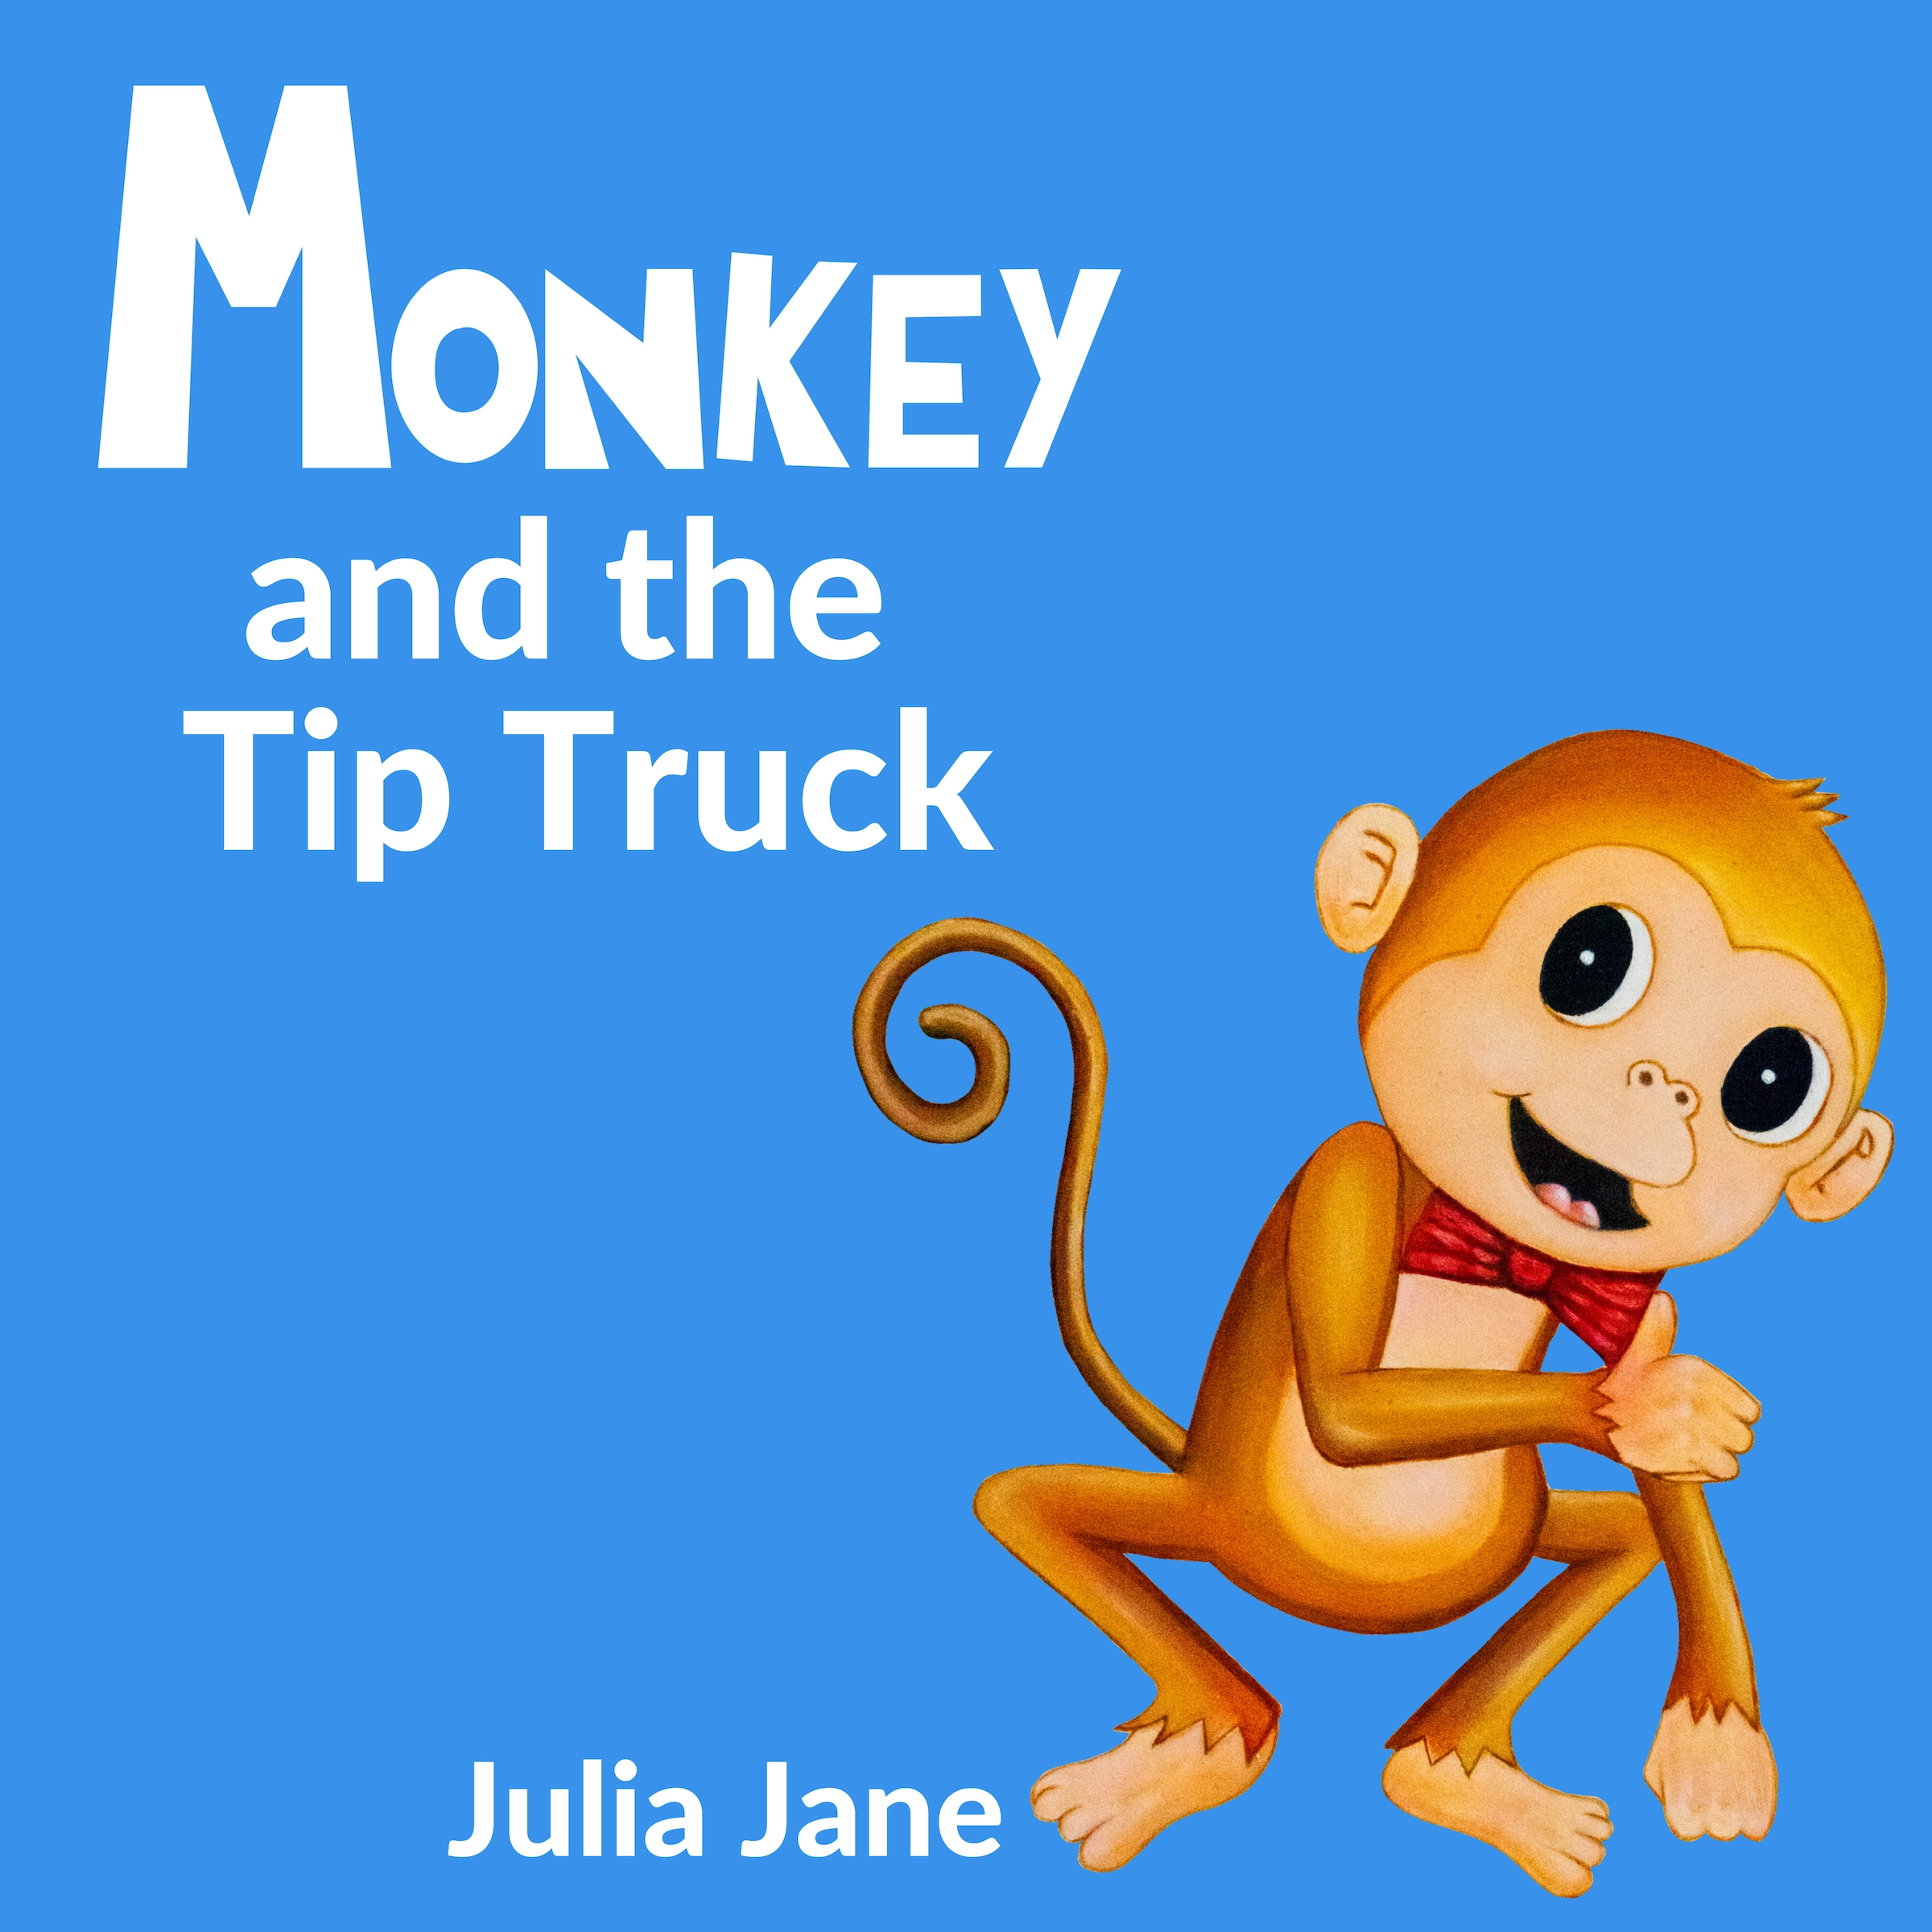 Monkey and the Tip Truck Audiobook by Julia Jane